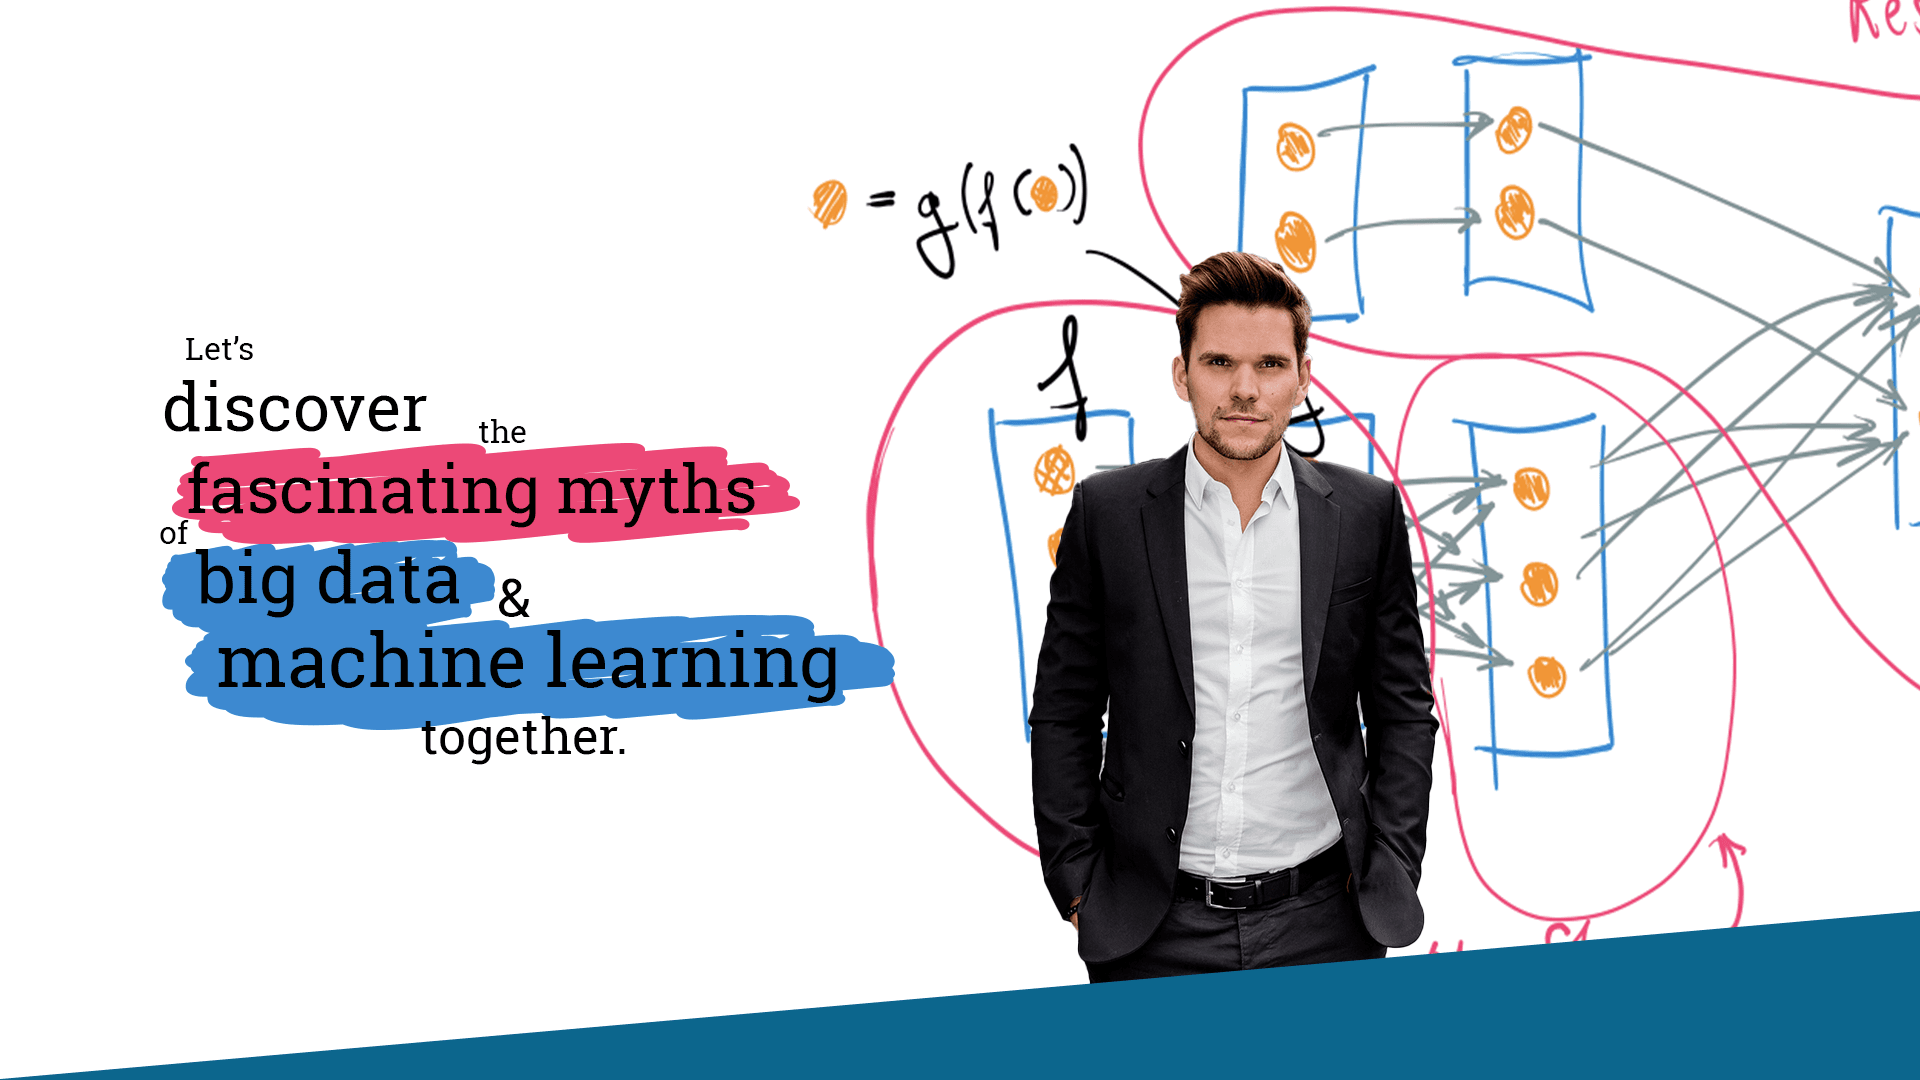 Let's discover the fascinating myths of big data & machine learning together